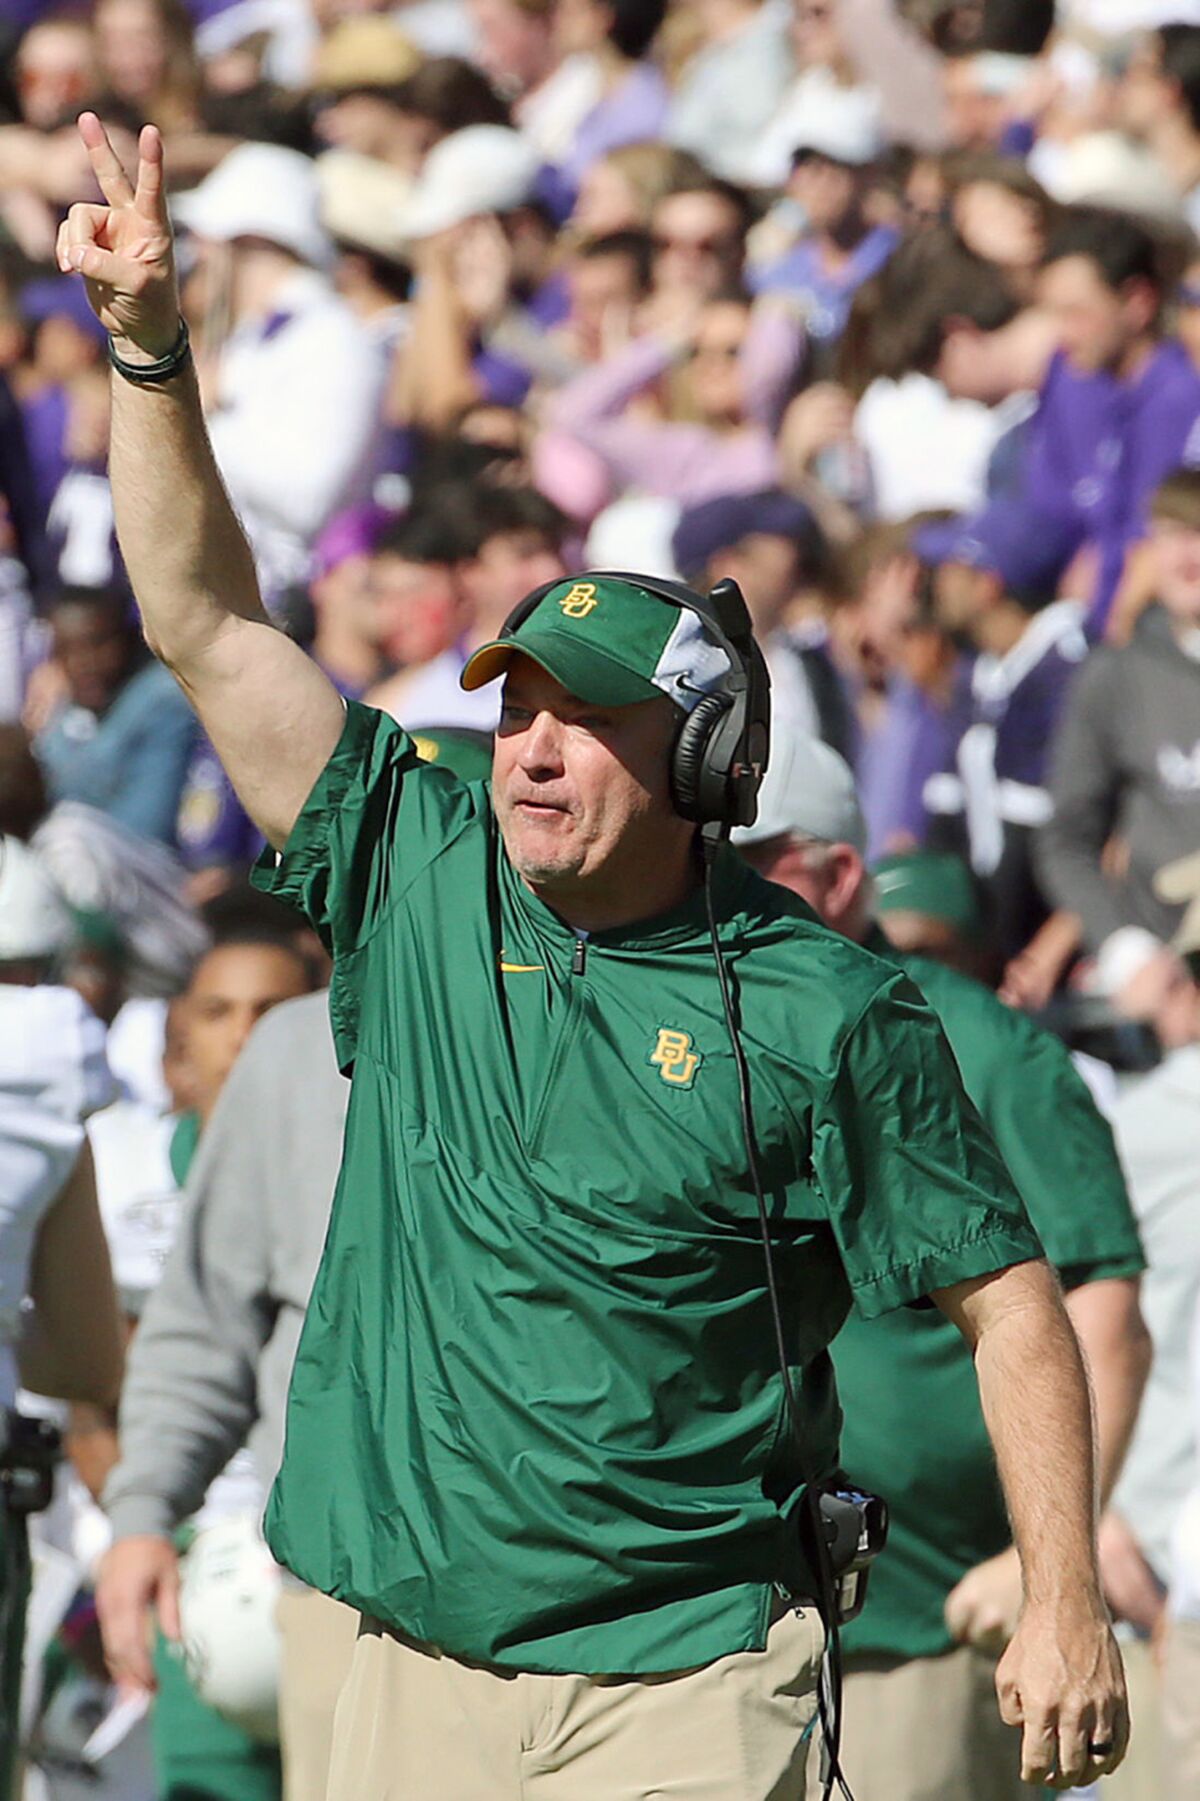 This undated photo shows Baylor associate head coach Joey McGuire during an NCAA college football game in Waco, Texas. Texas Tech is finalizing a deal to hire Baylor assistant and longtime Texas high school coach Joey McGuire as its next head coach. A person familiar with knowledge of the decision told The Associated Press on Monday, Nov. 8, 2021, that Tech was planning to announce the hiring of McGuire soon. The person spoke on condition of anonymity because details of an agreement were still be completed. (Jerry Larson/Waco Tribune Herald, via AP)